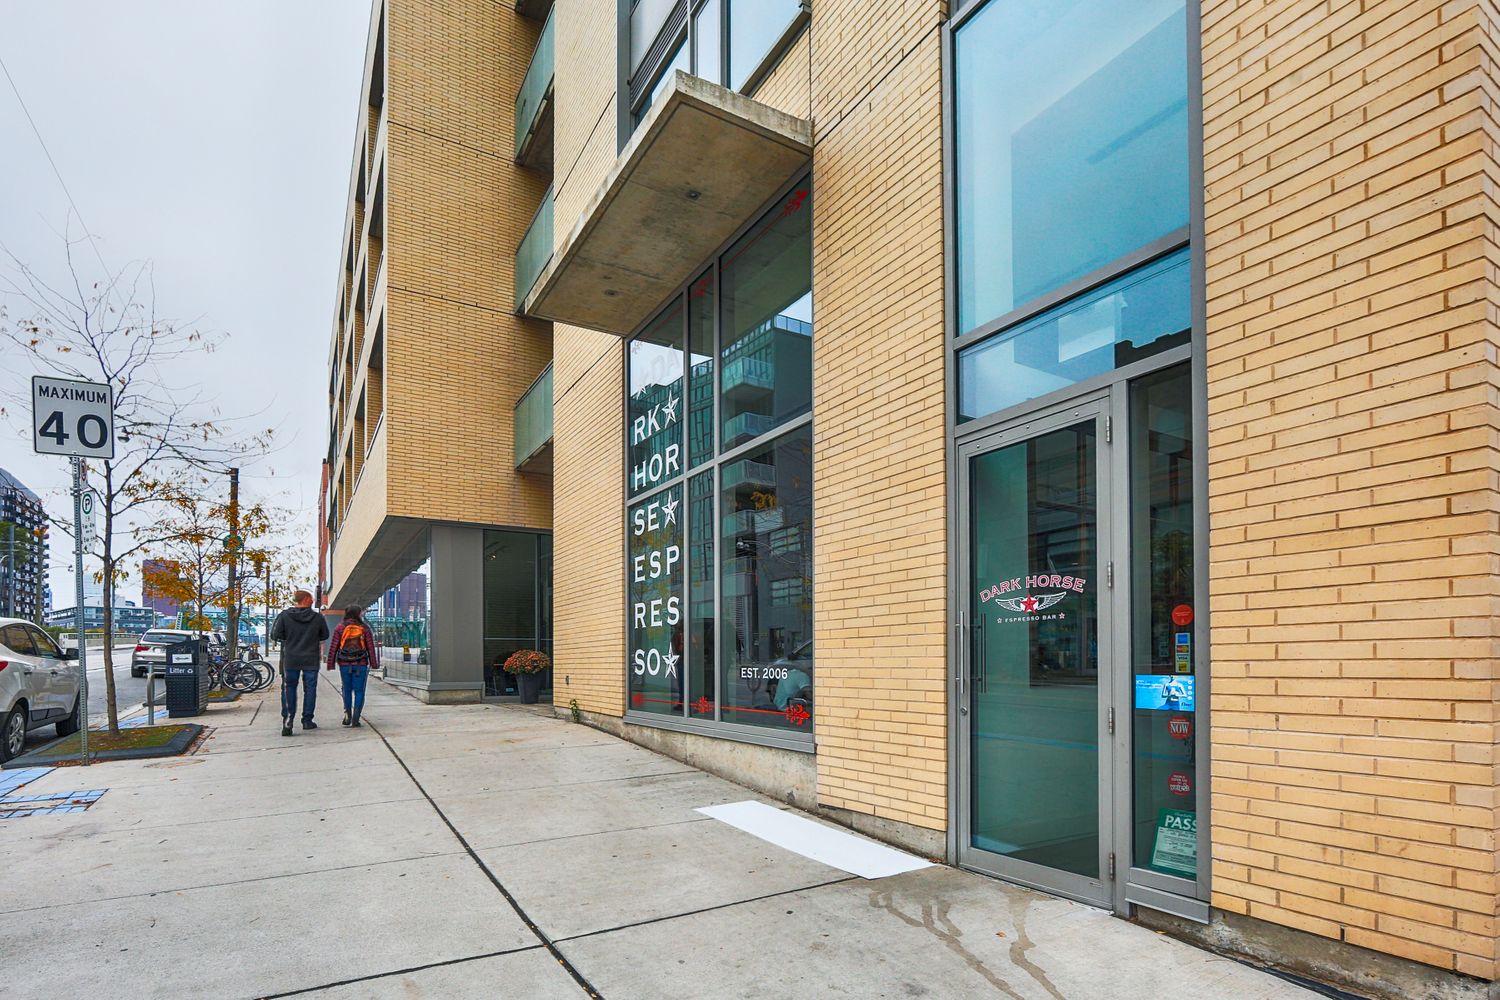 630 Queen Street E. Sync Lofts is located in  East End, Toronto - image #6 of 6